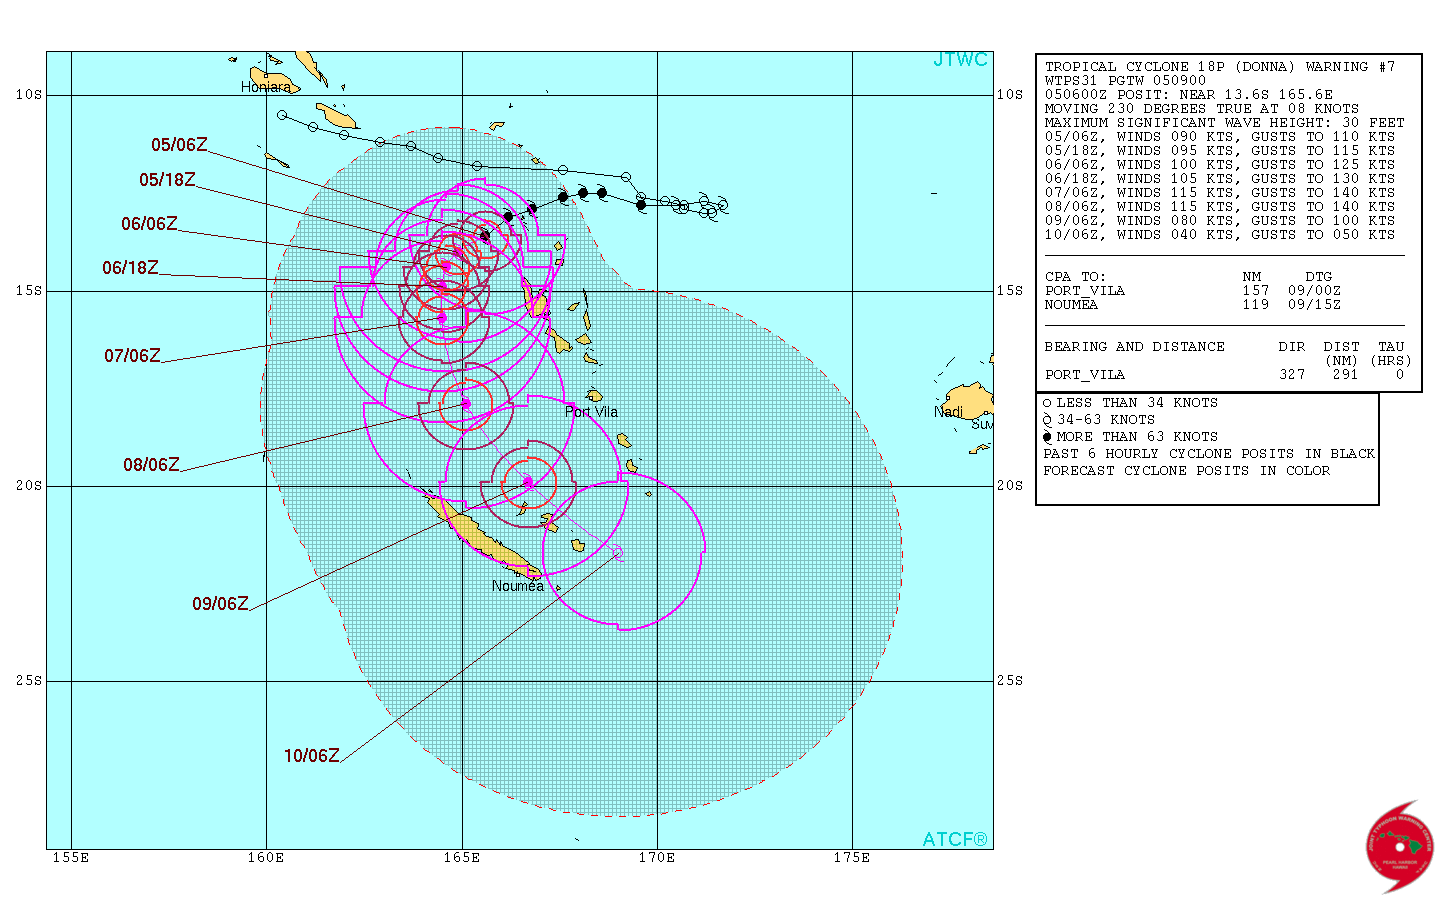 Tropical Cyclone Donna forecast track by JTWC on May 5, 2017